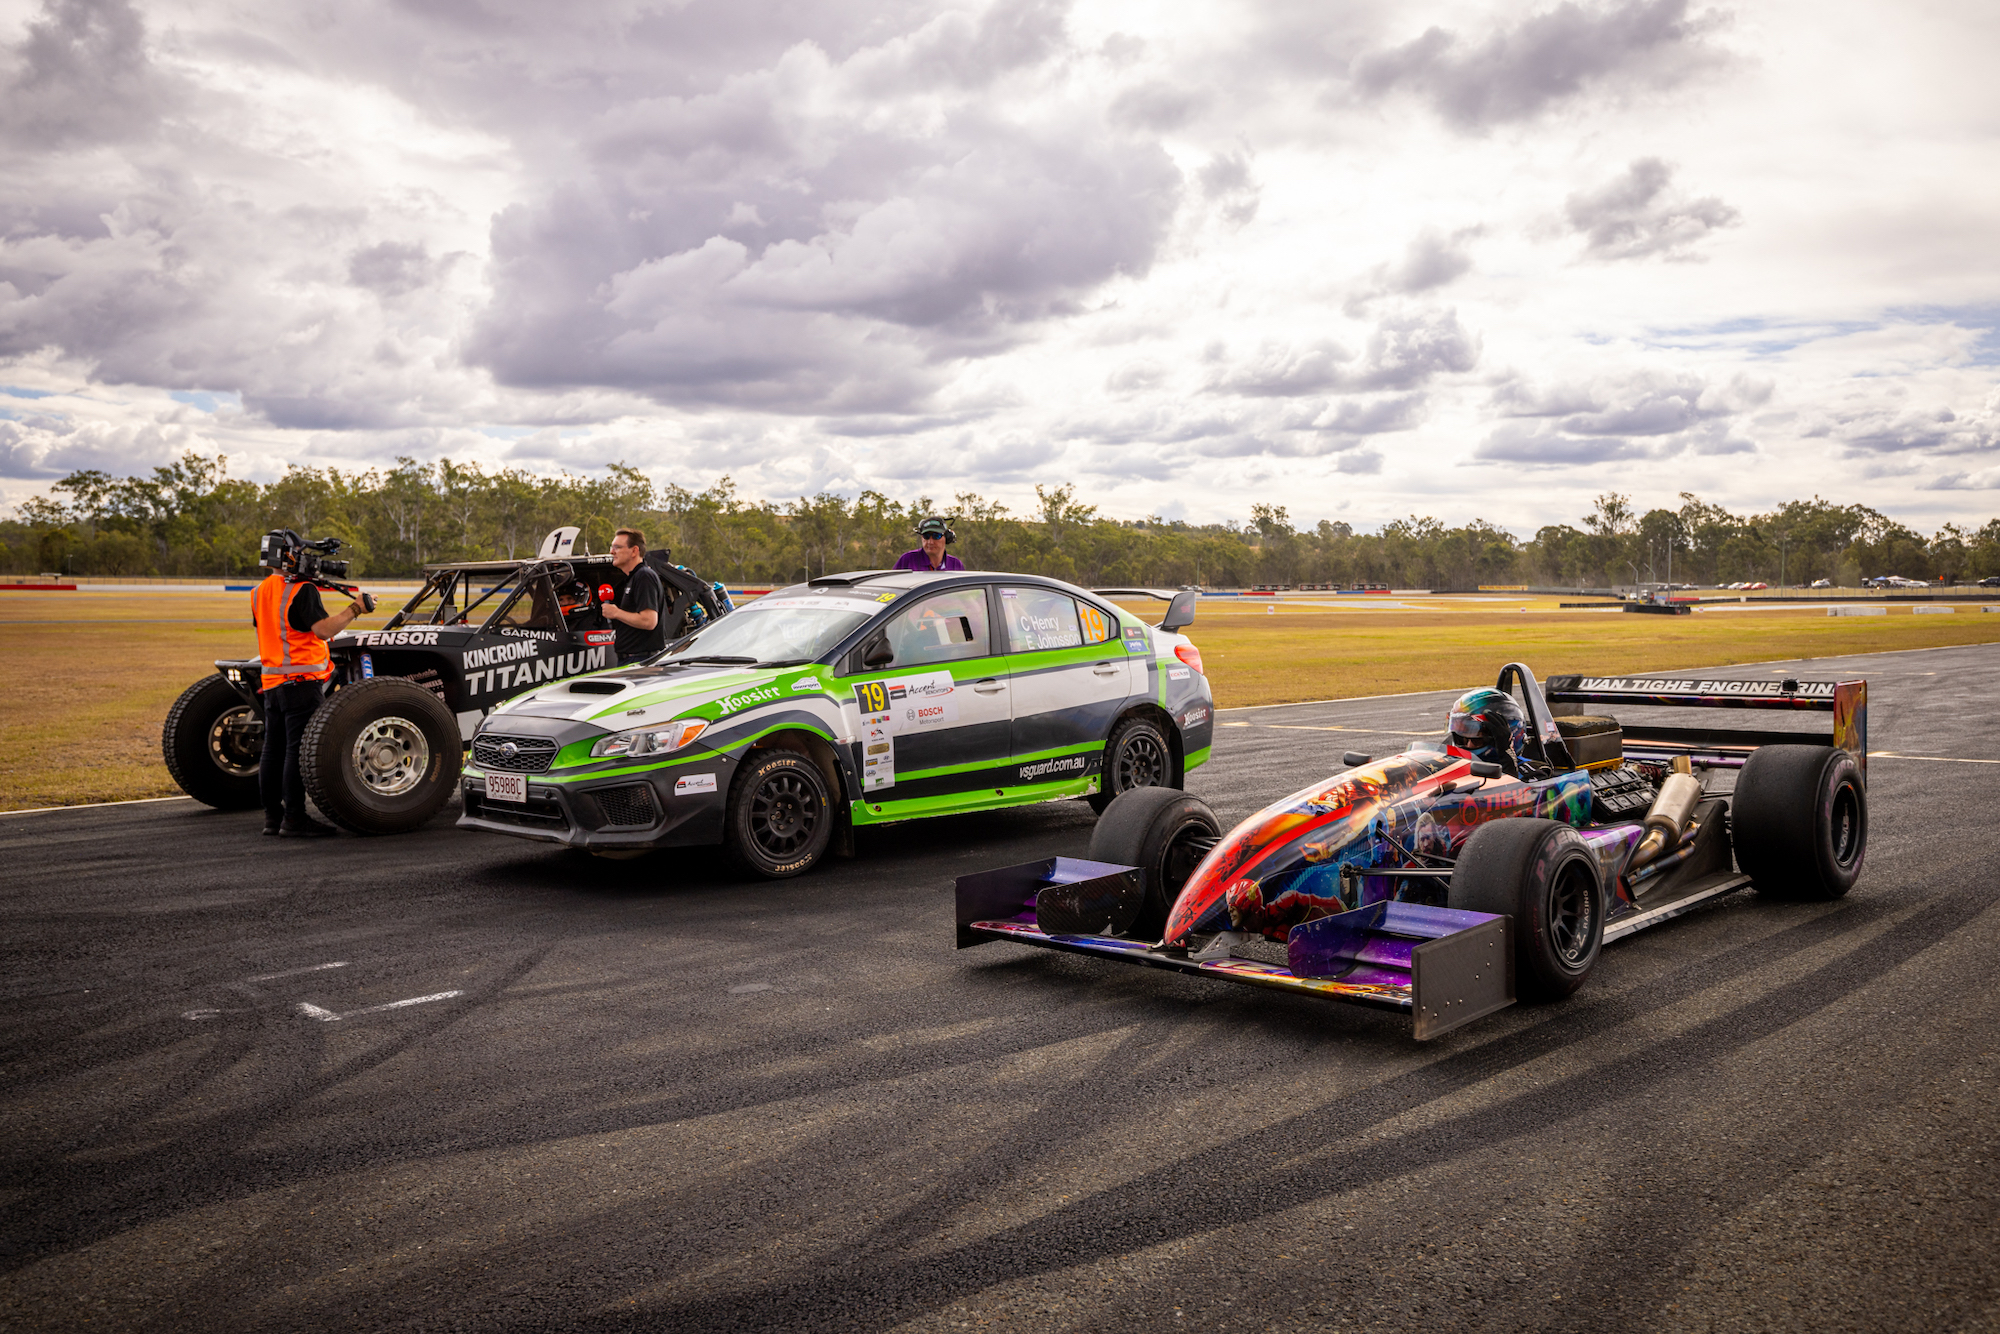 shannons trophy series wraps up qr on high: sunday wrap